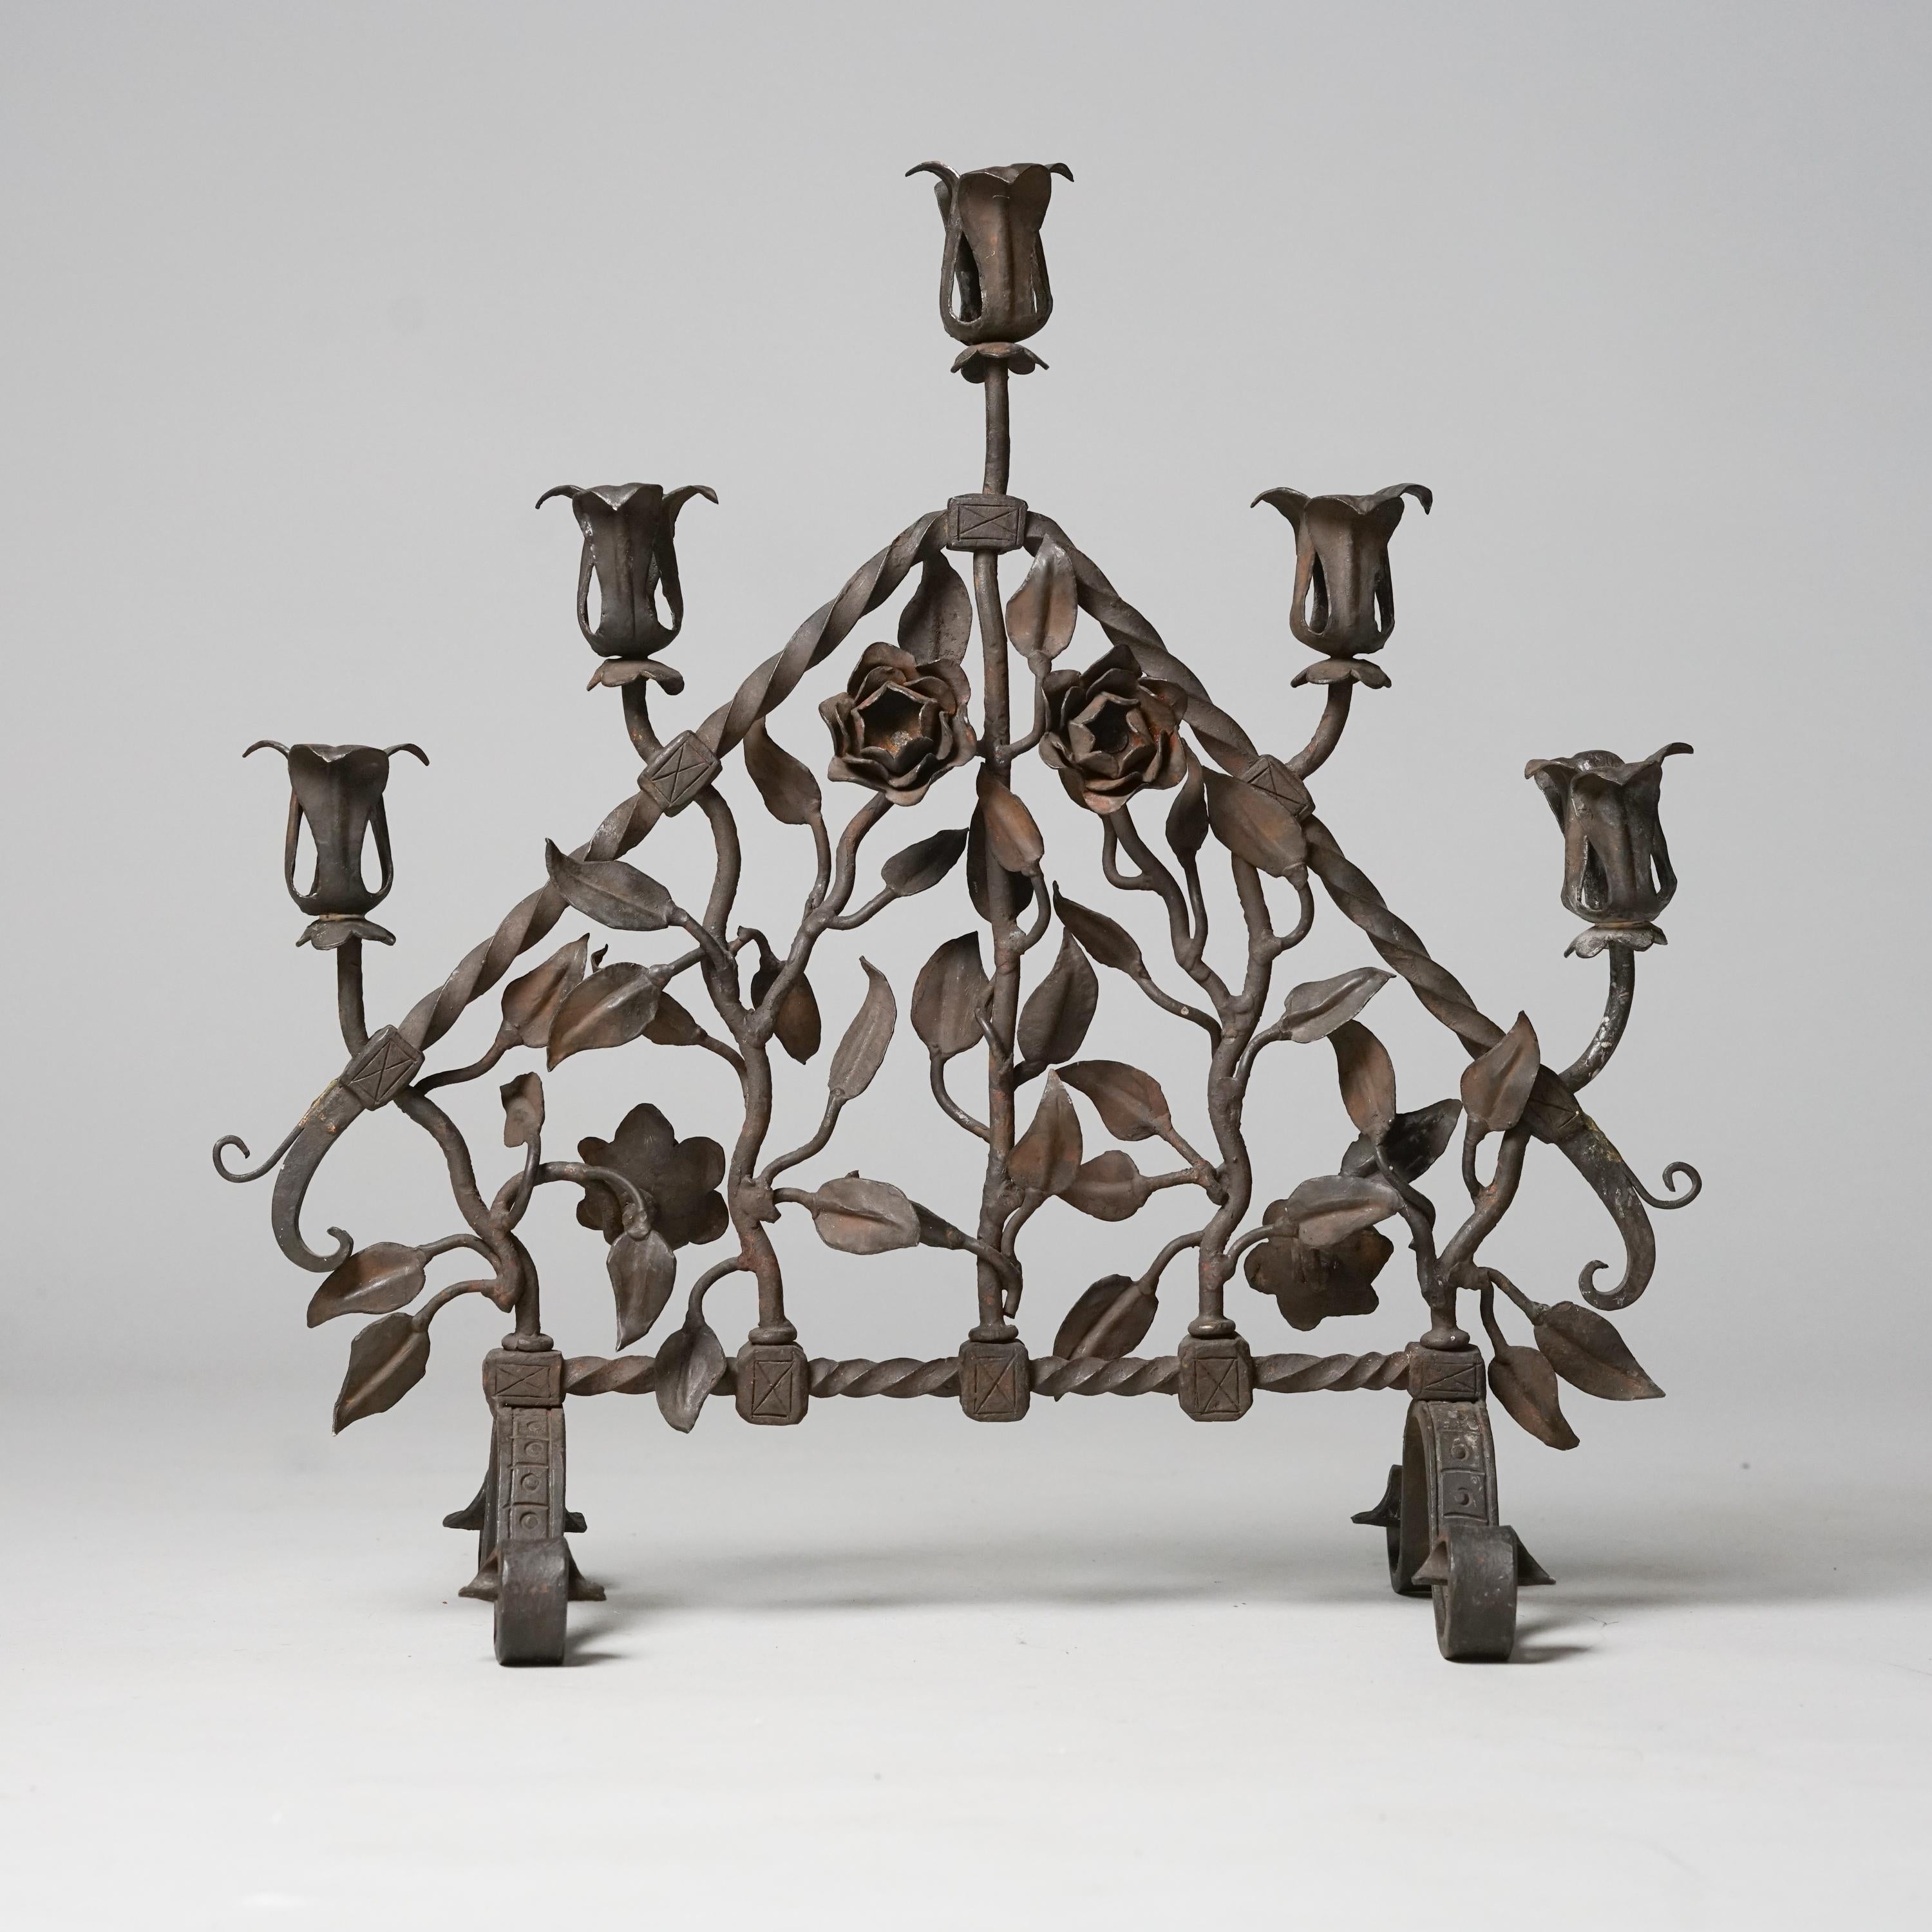 Candelabra, manufactured by Taidetakomo Hakkarainen, Finland, Early 20th Century. Forged iron. Beautiful rose details. Good vintage condition, patina consistent with age and use. 
